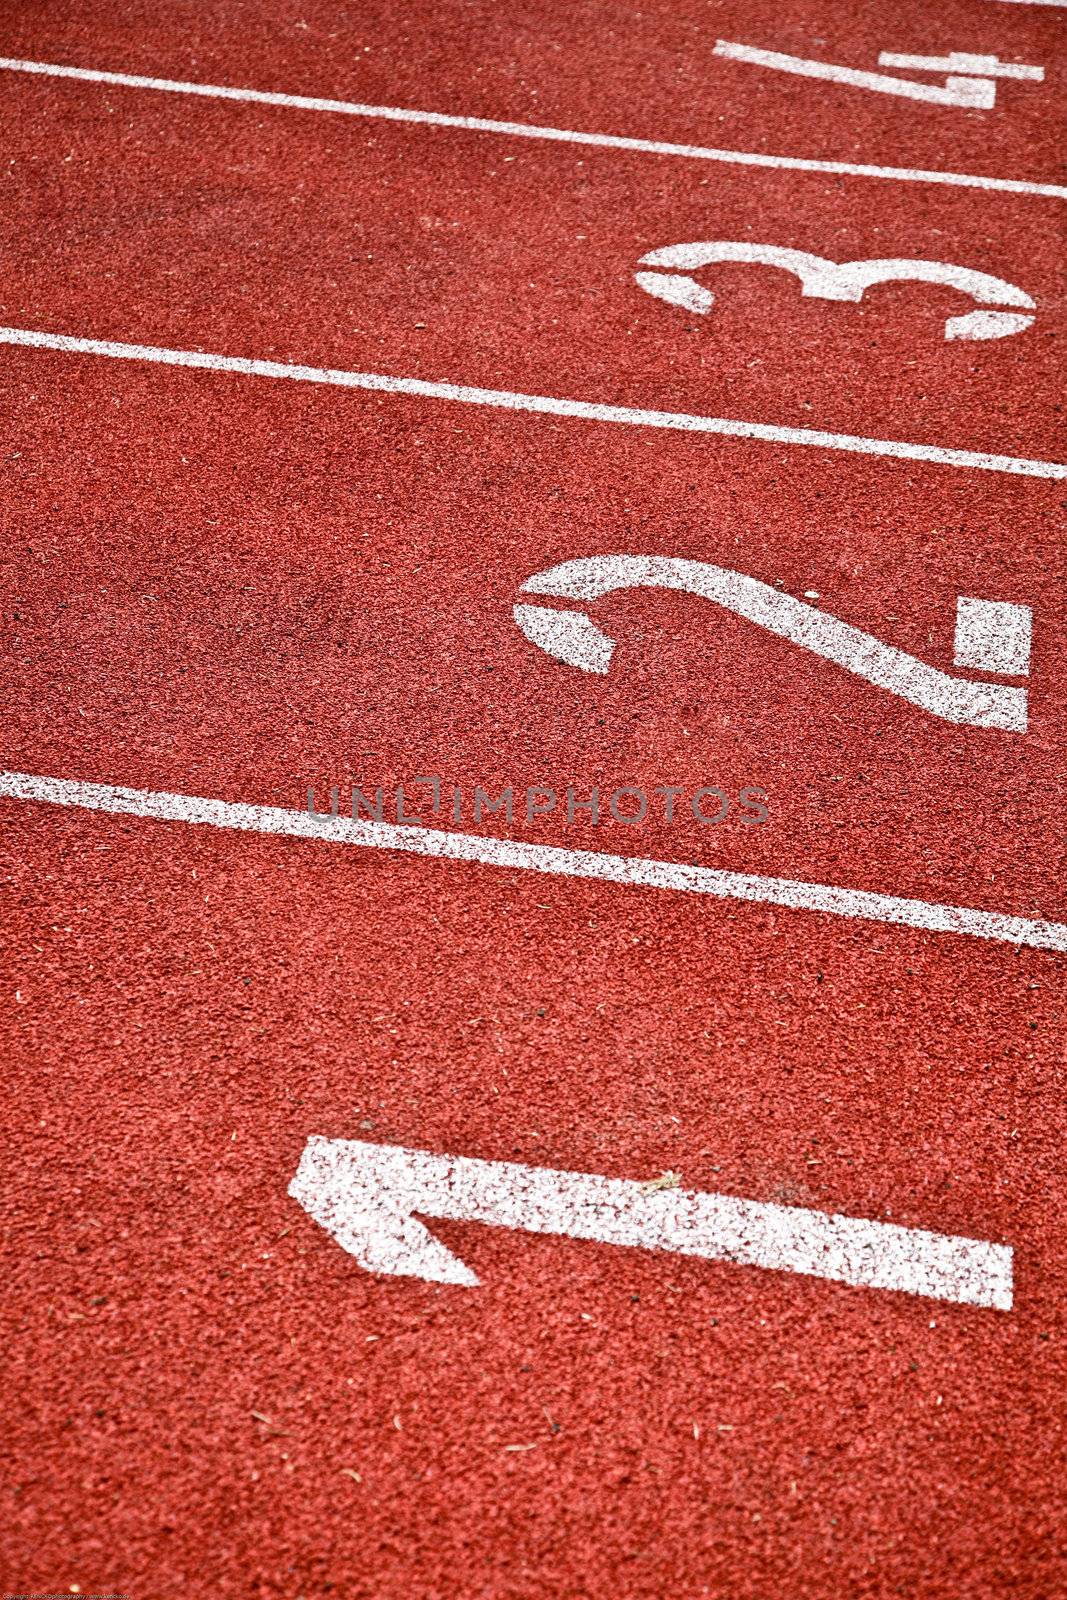 Numbered Running Track Lanes by nfx702